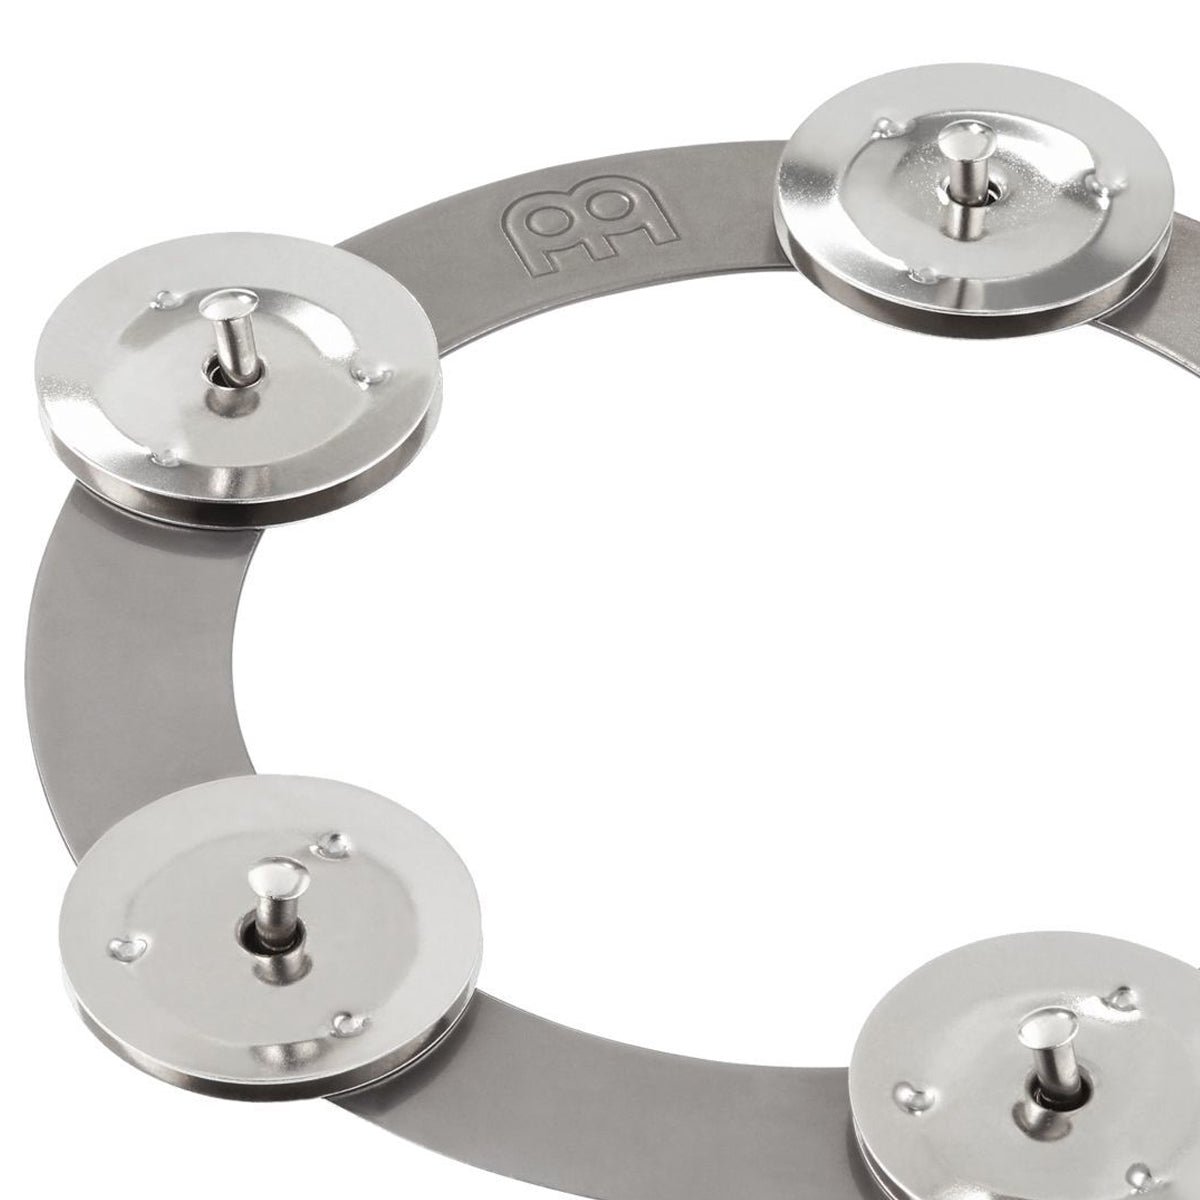 Meinl Ching Ring 6"